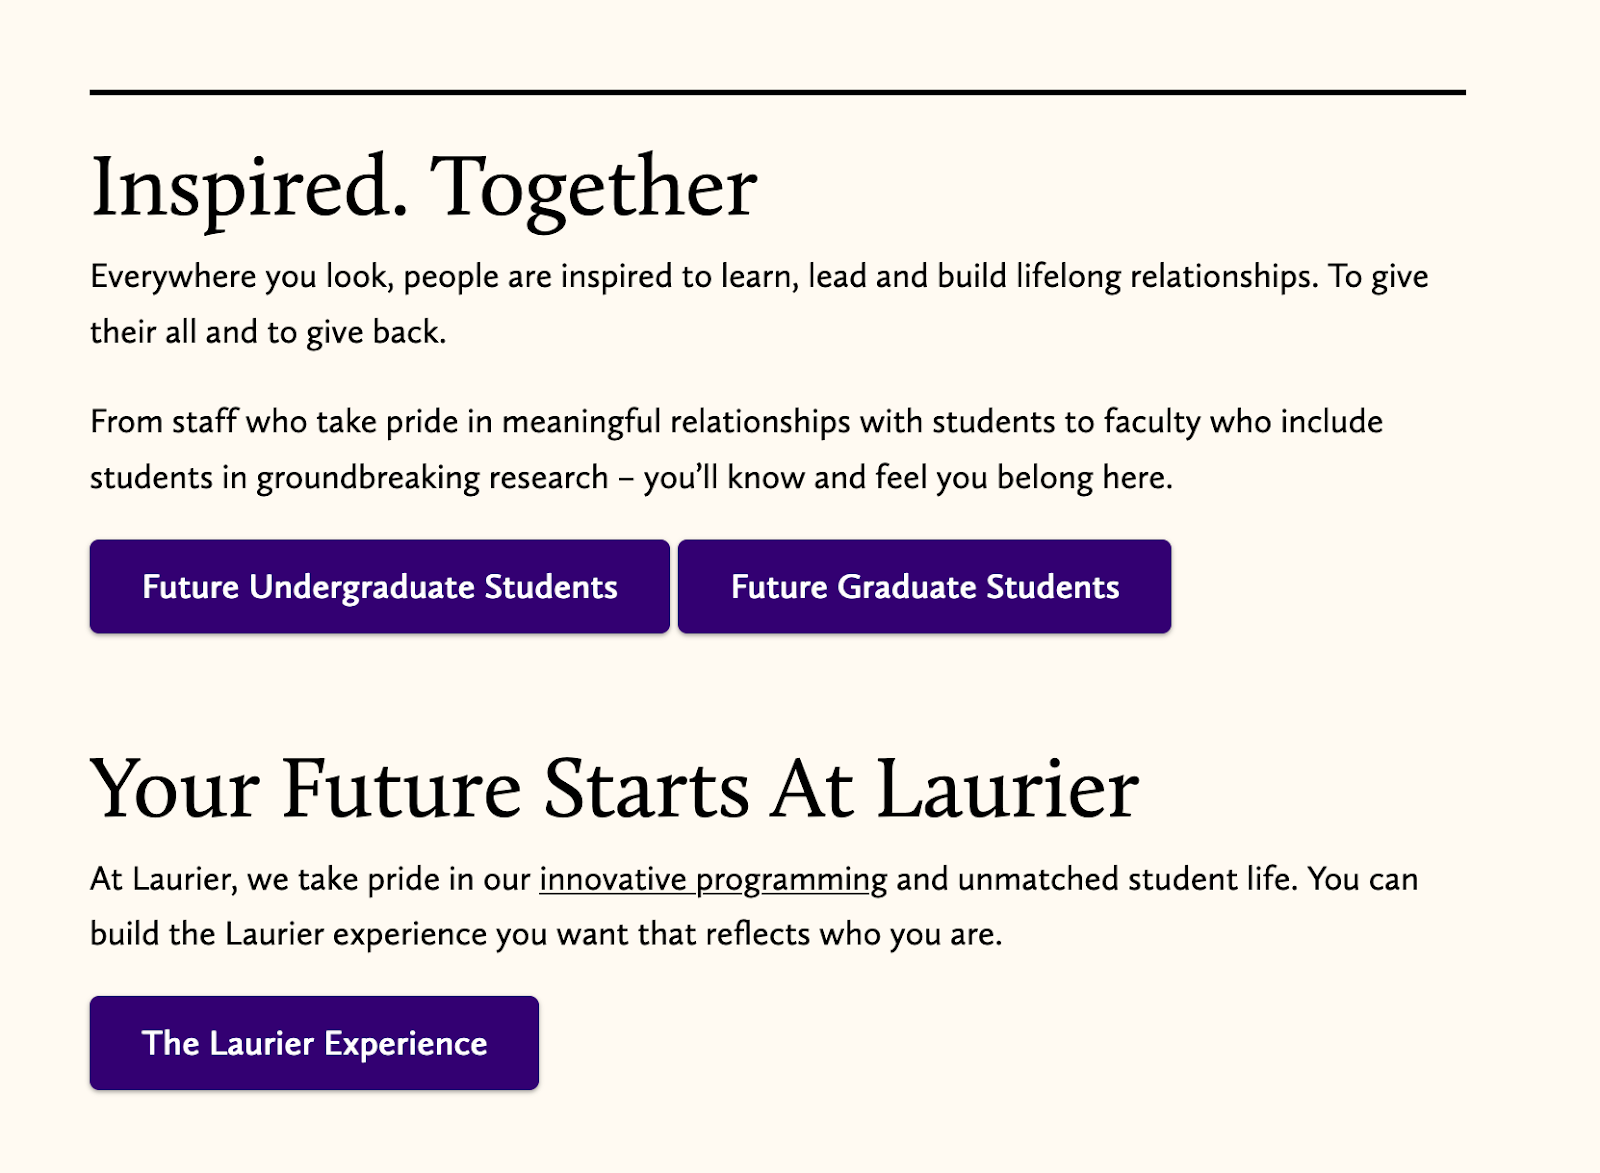 laurier-banner3-personalization.png